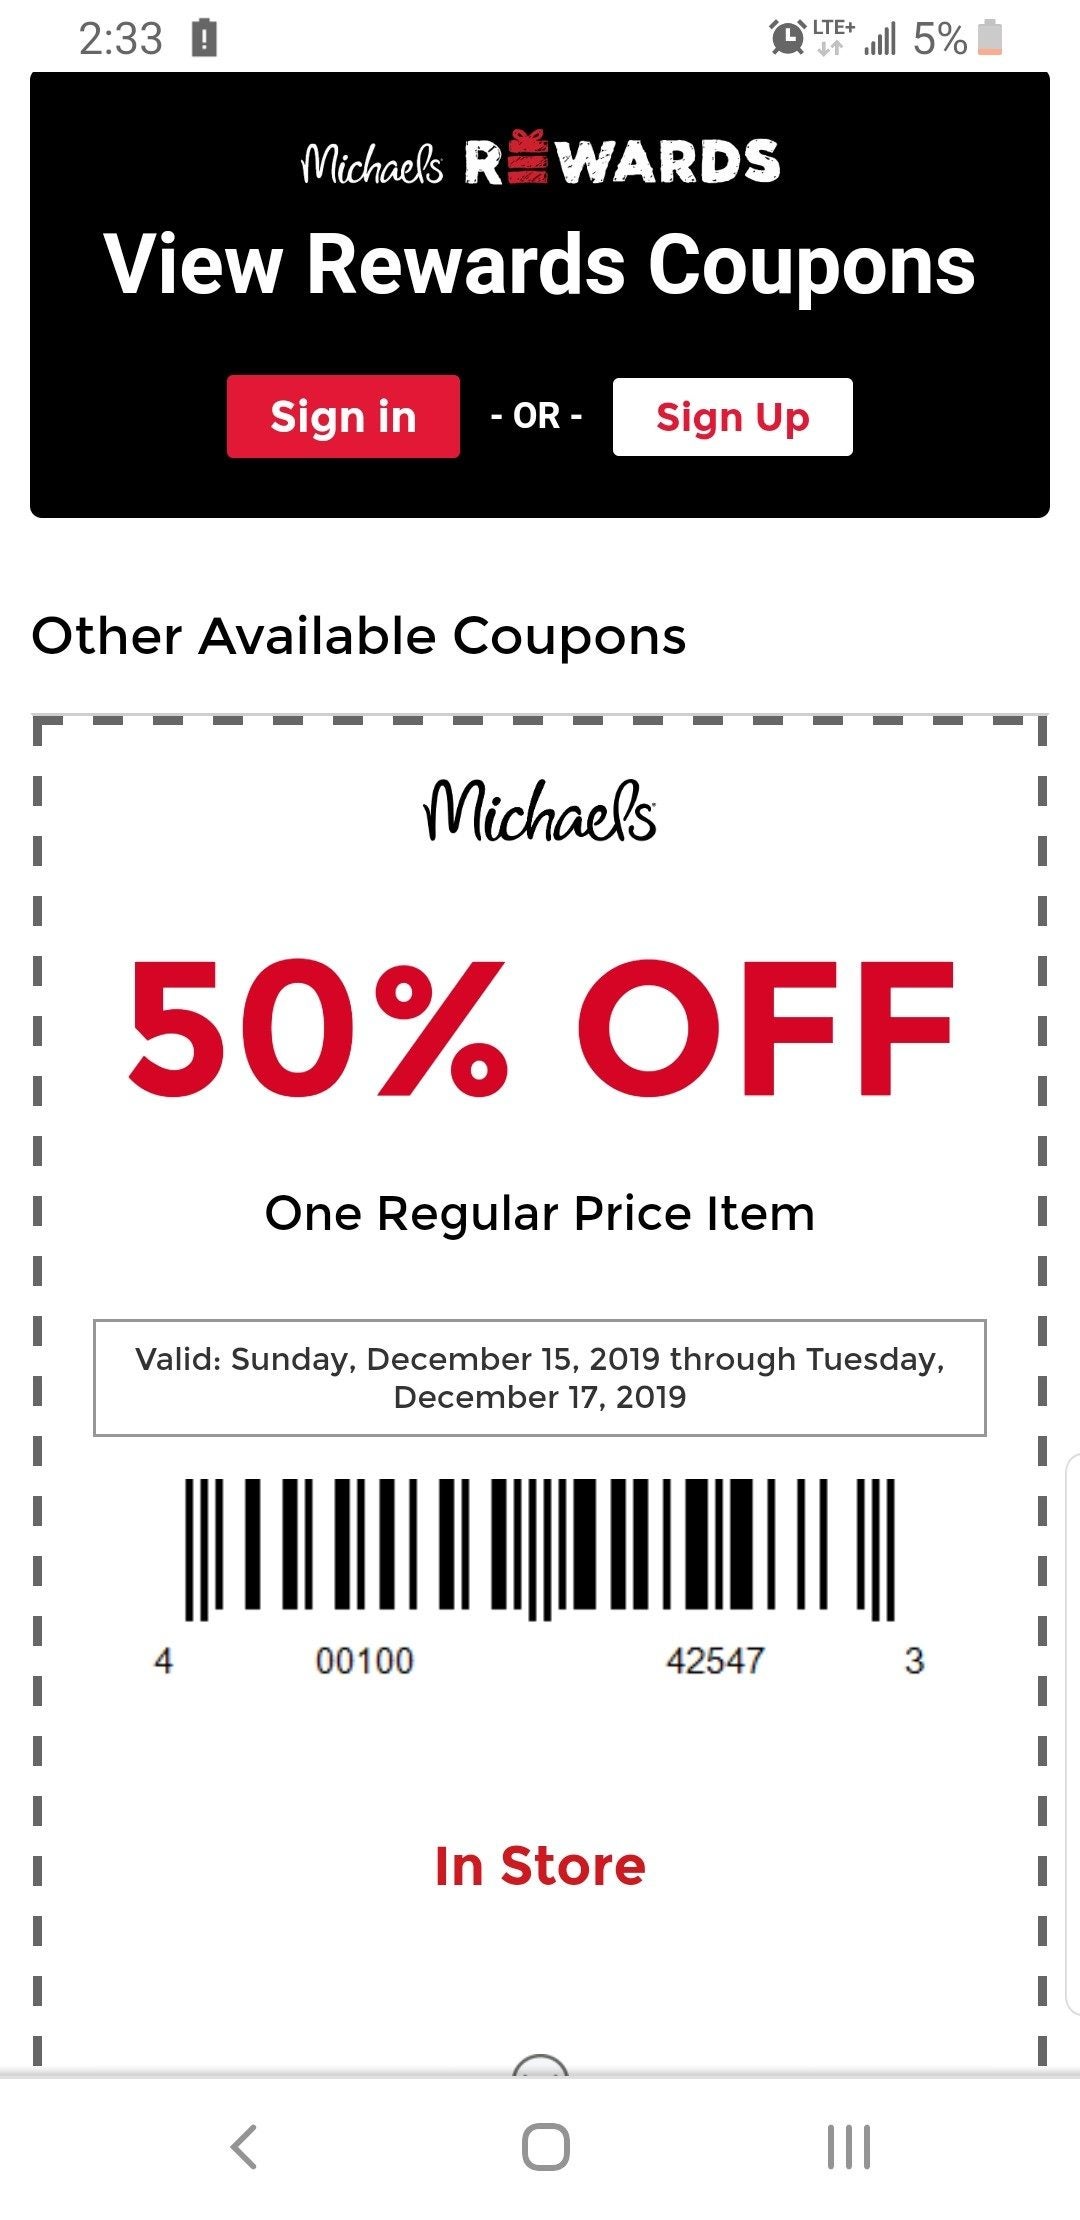 How to Craft a Misleading Coupon Campaign @Michaels_ca